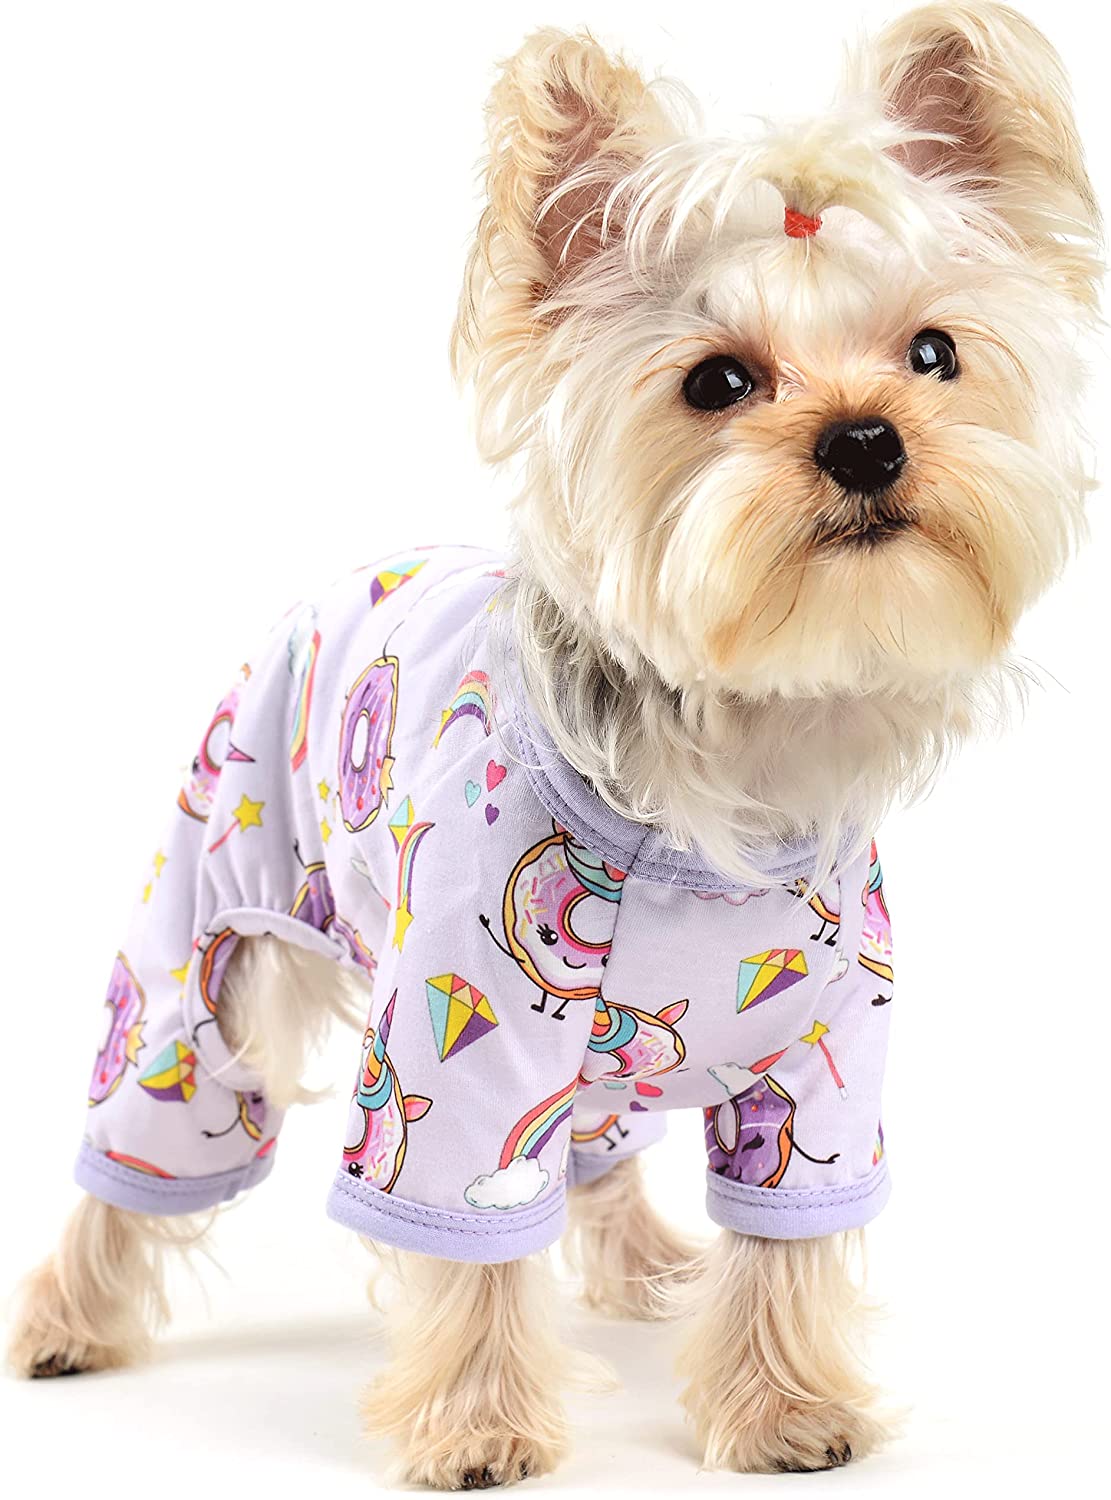 KUTKUT Small Dog Bodysuit, Dog Pjs Spring Doggie Onesies Summer Pet Jammies Dog Clothes for Puppies Small Dogs Girl, Cat Apparel Outfit For ShihTzu, Maltese, Bichon - kutkutstyle